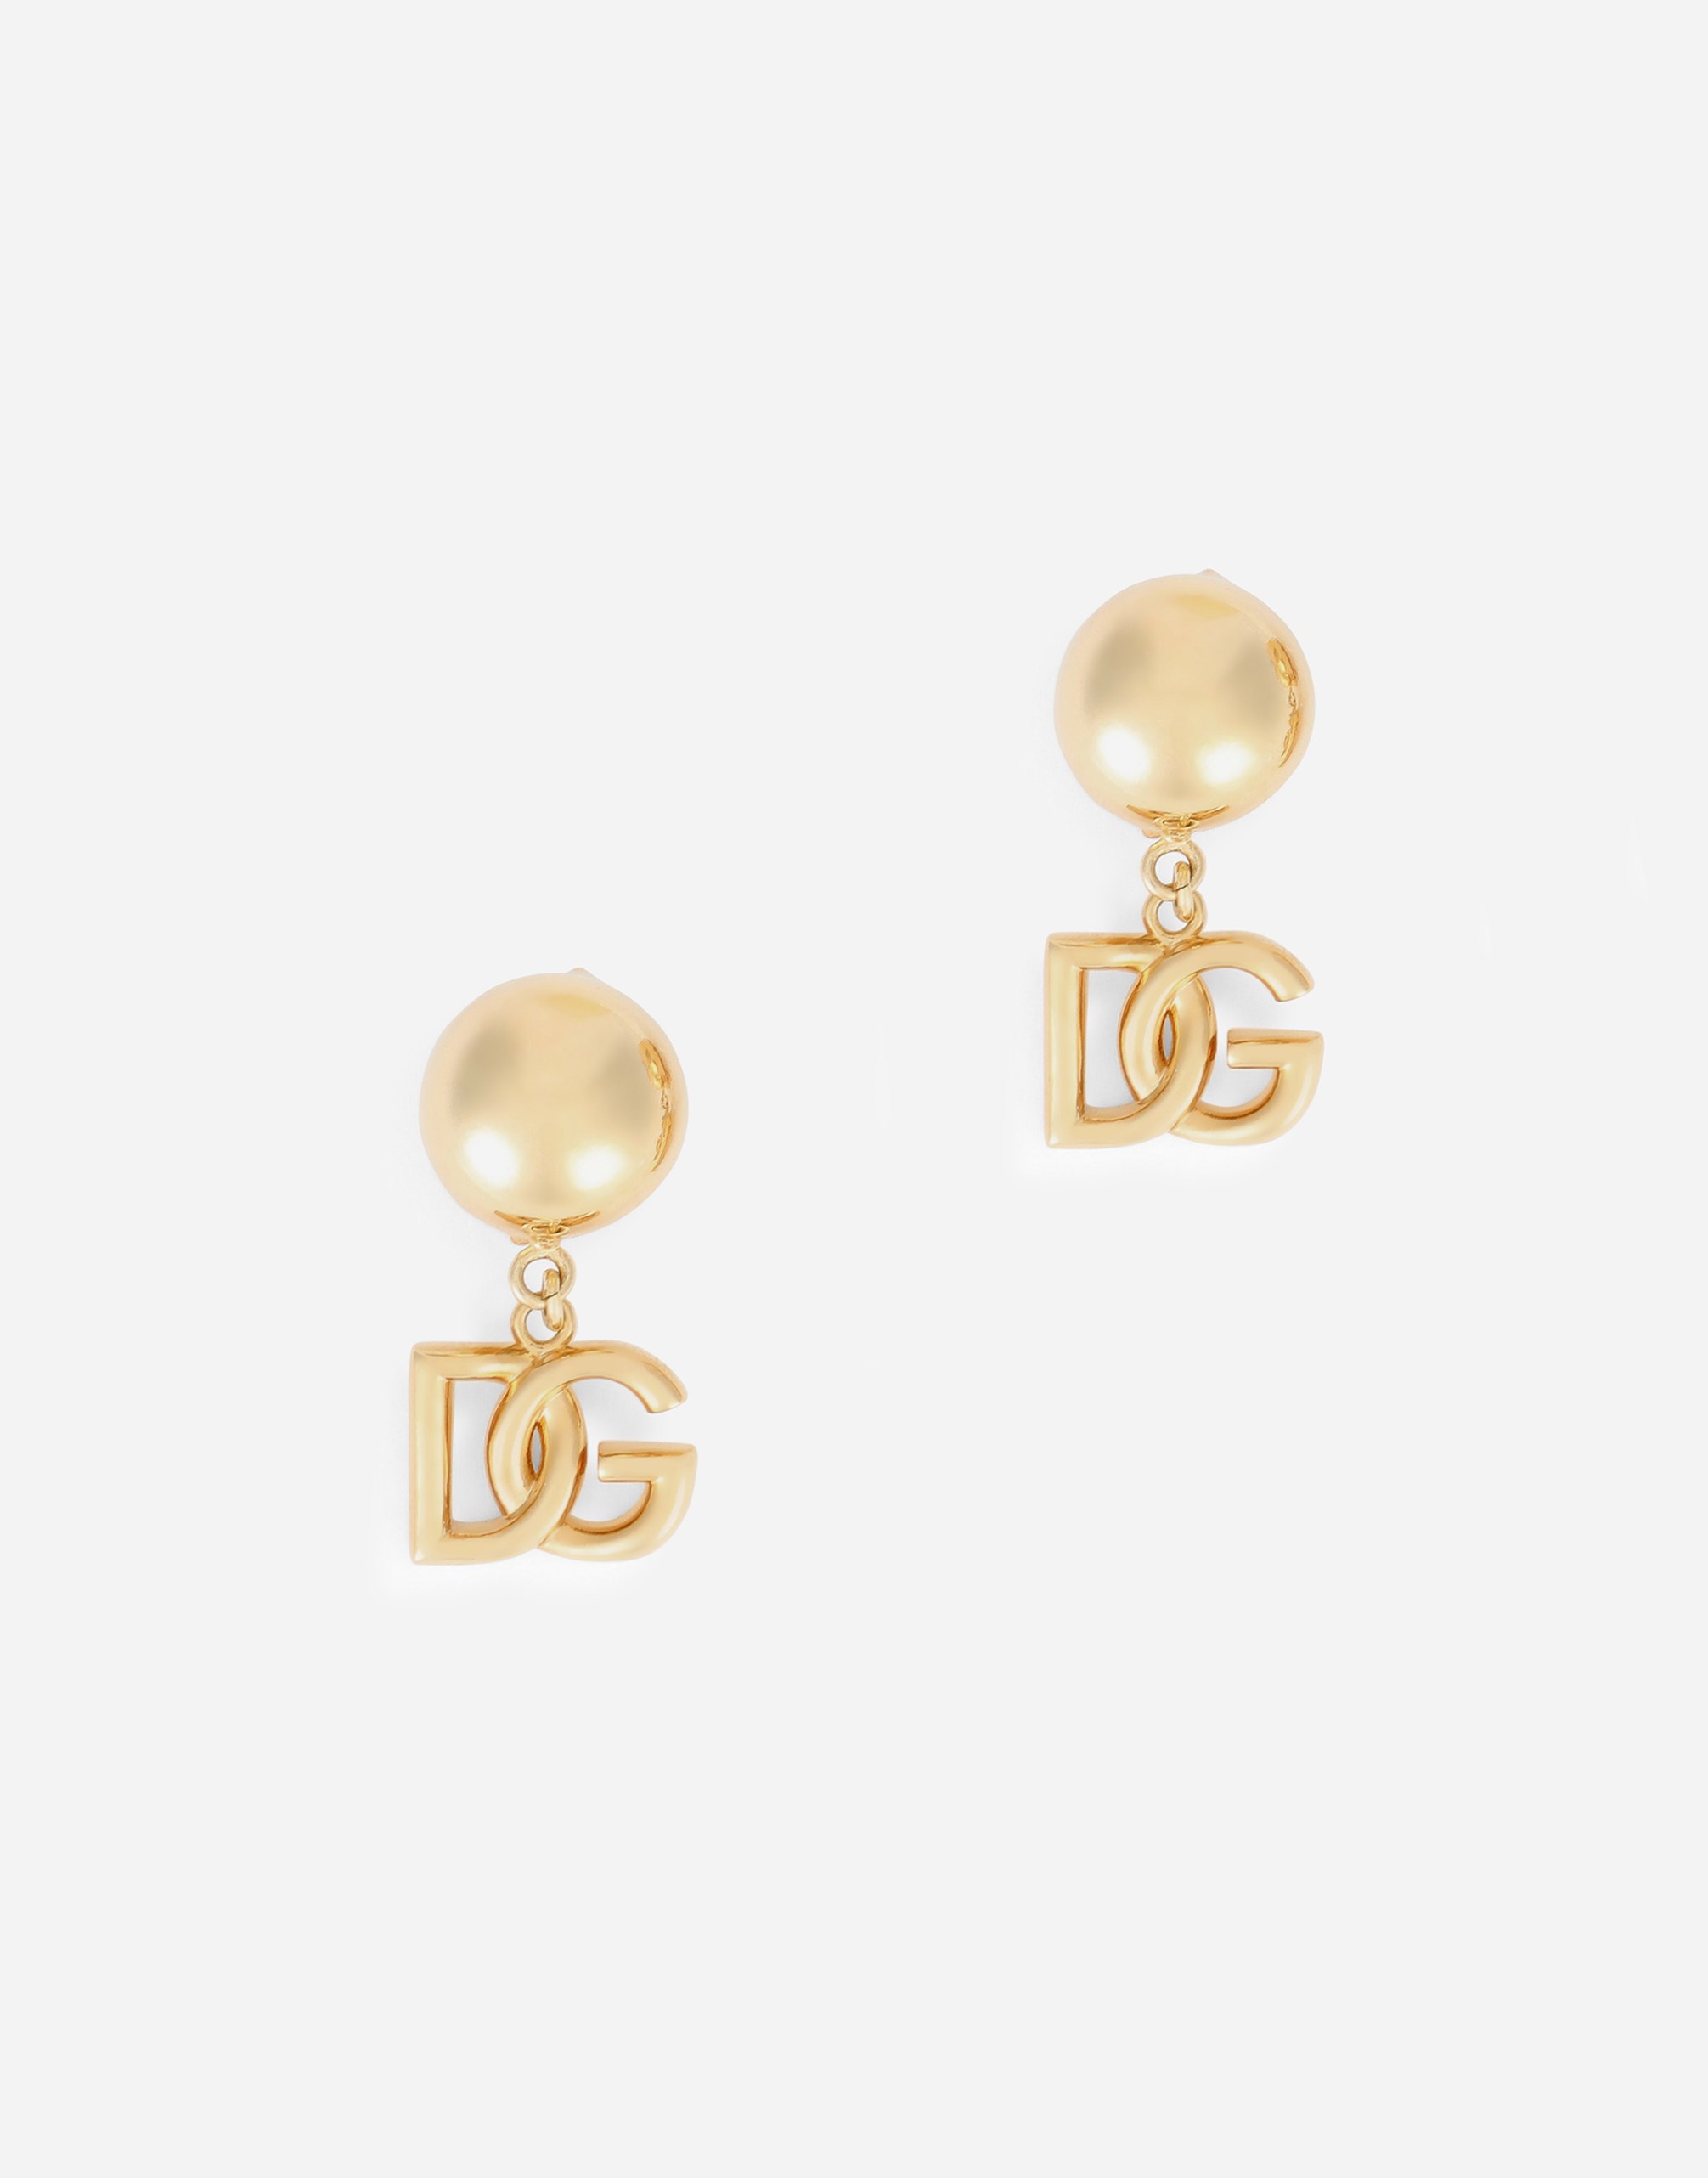 Clip-on earrings with DG logo in Gold